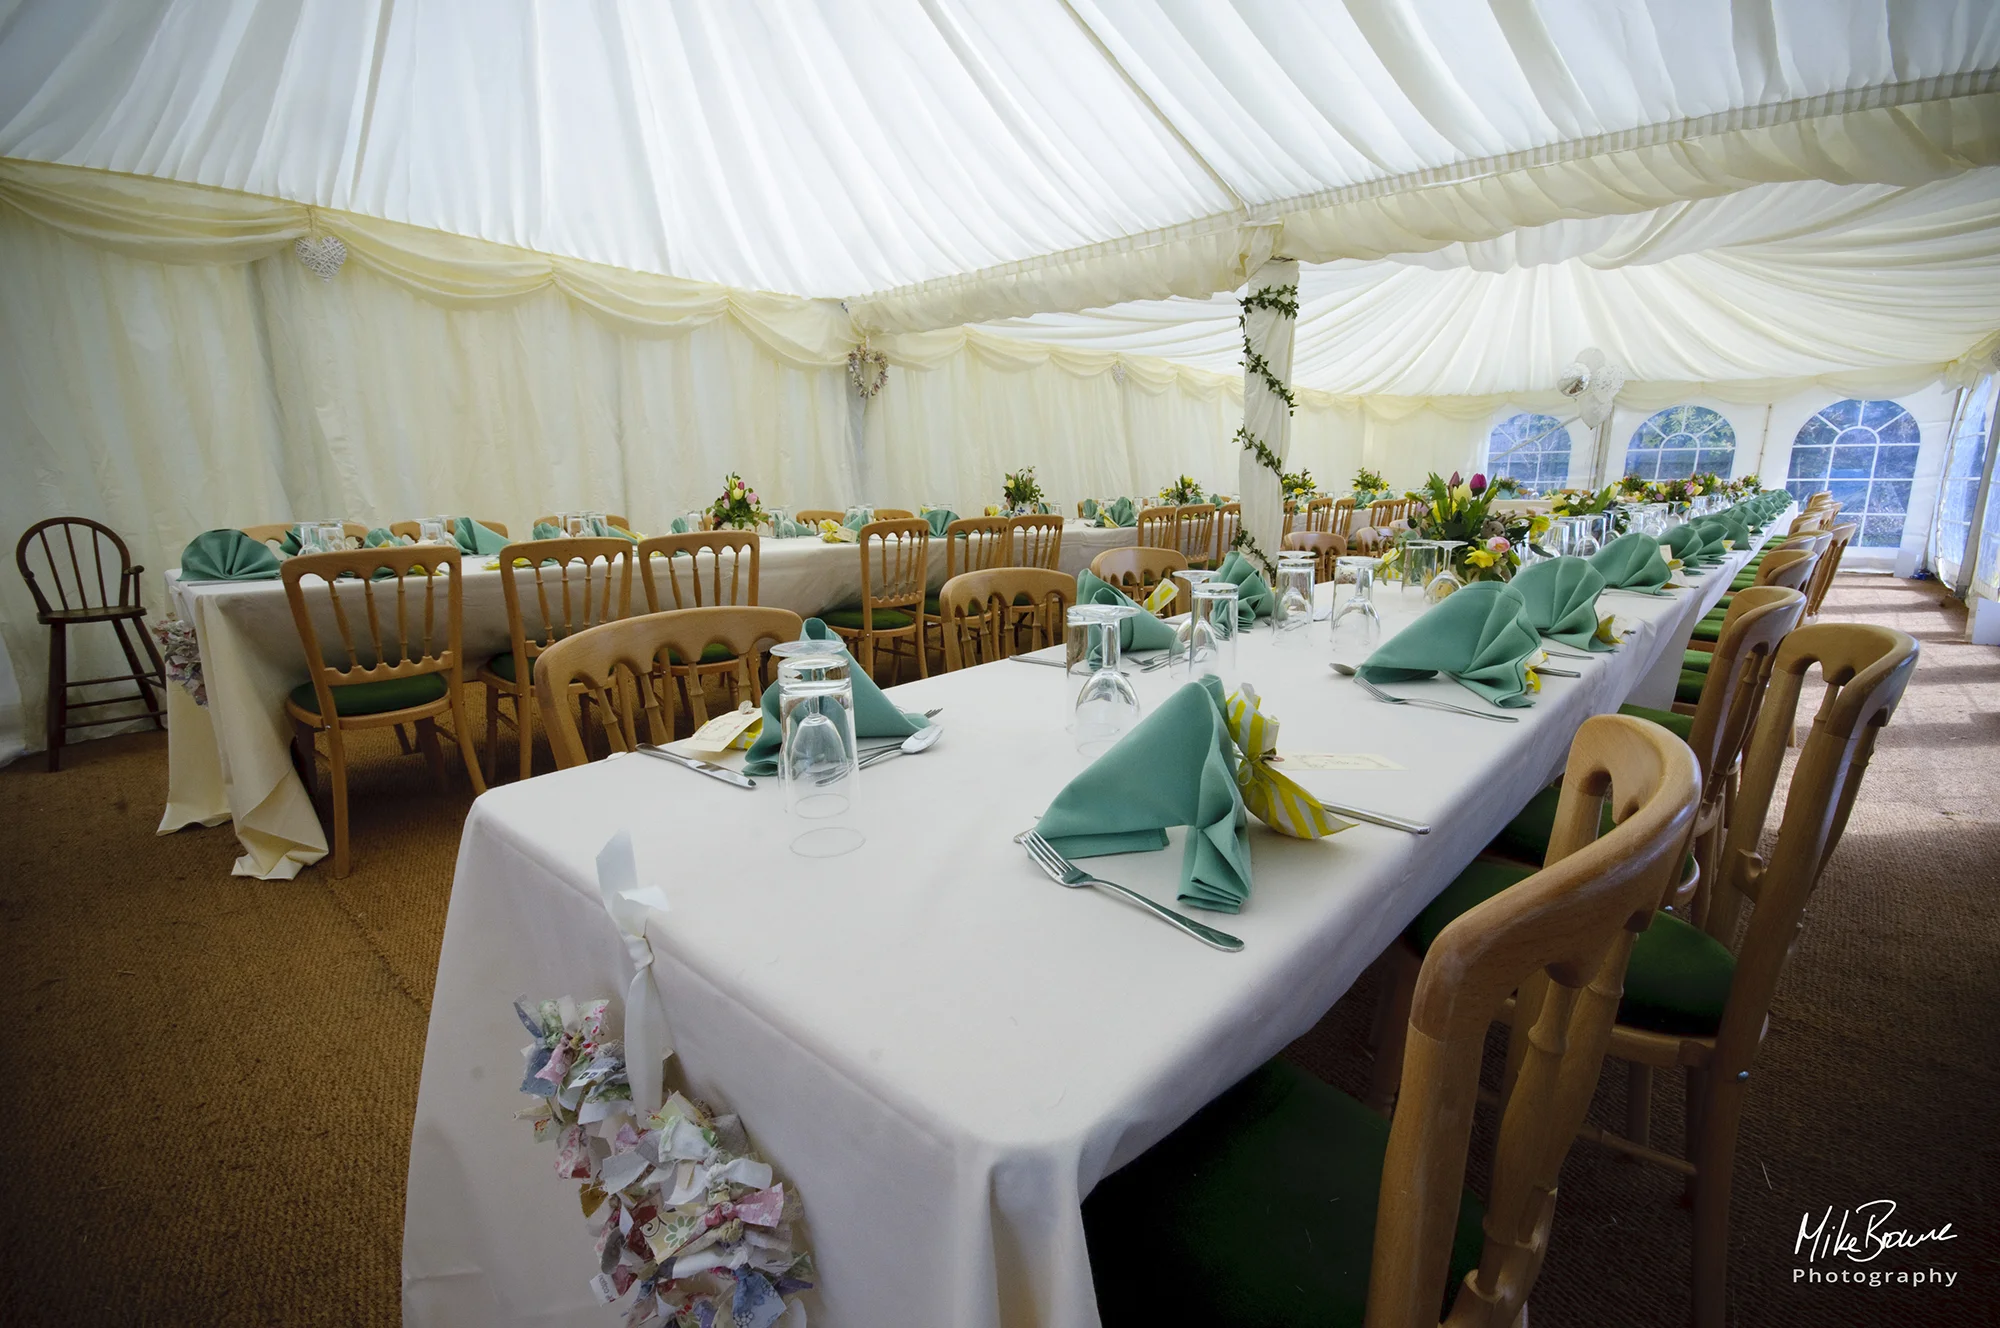 Dining tables, chairs and place settings laid out for a wedding in a white marquee